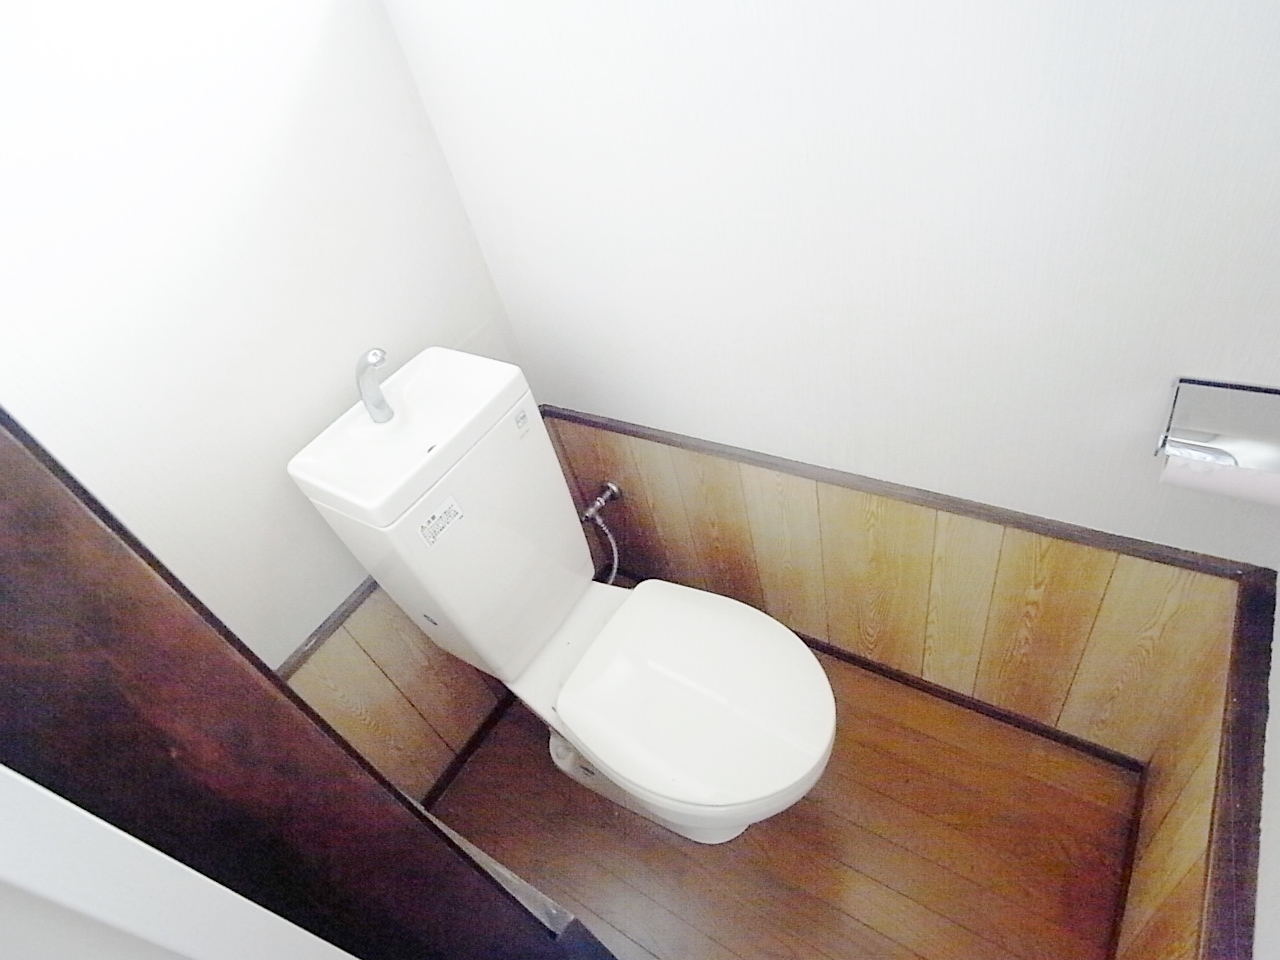 Other. The toilet comes with a small window ^^